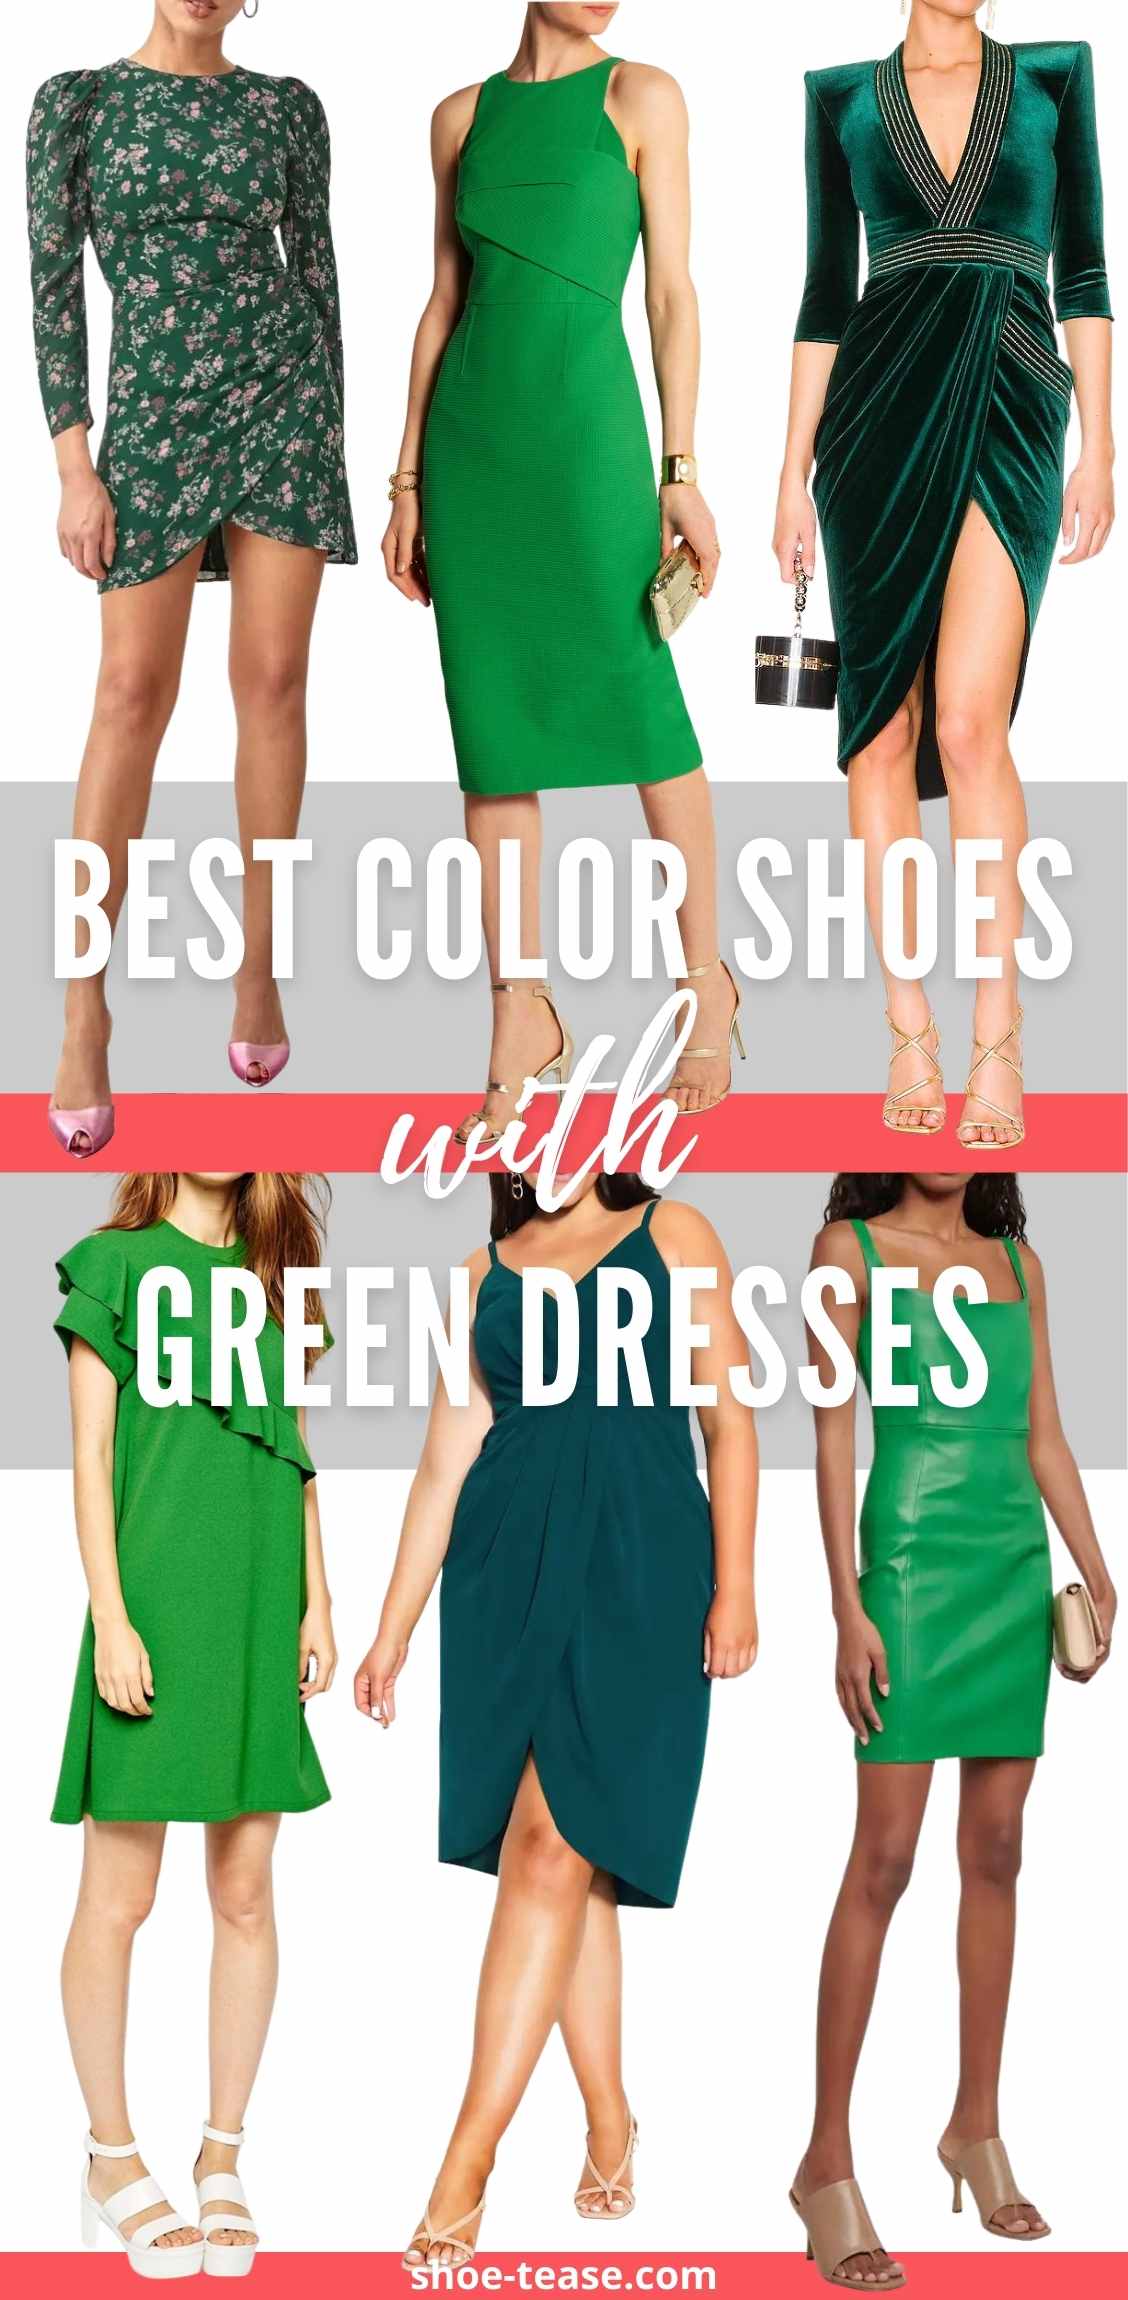 What color shoes to wear with dark green dress